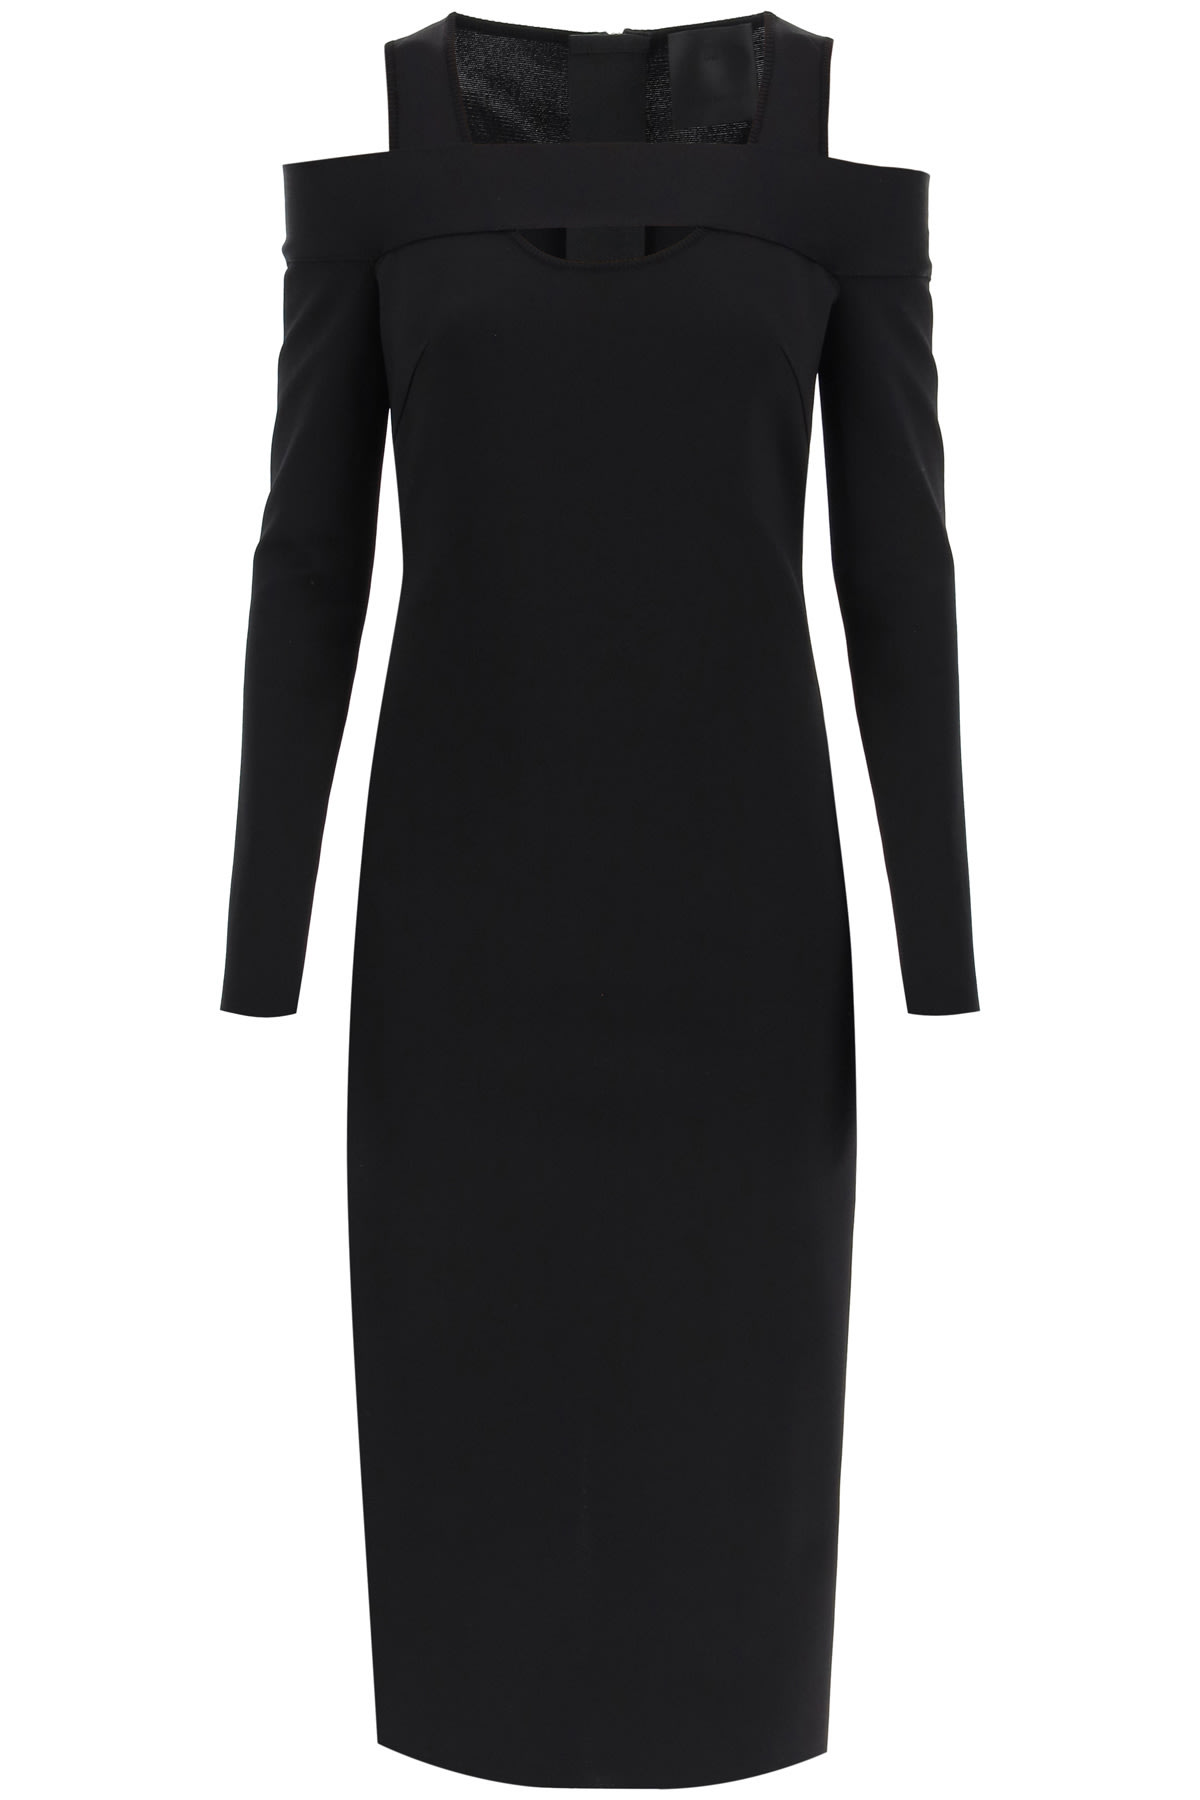 Givenchy Cut-out Jersey Dress